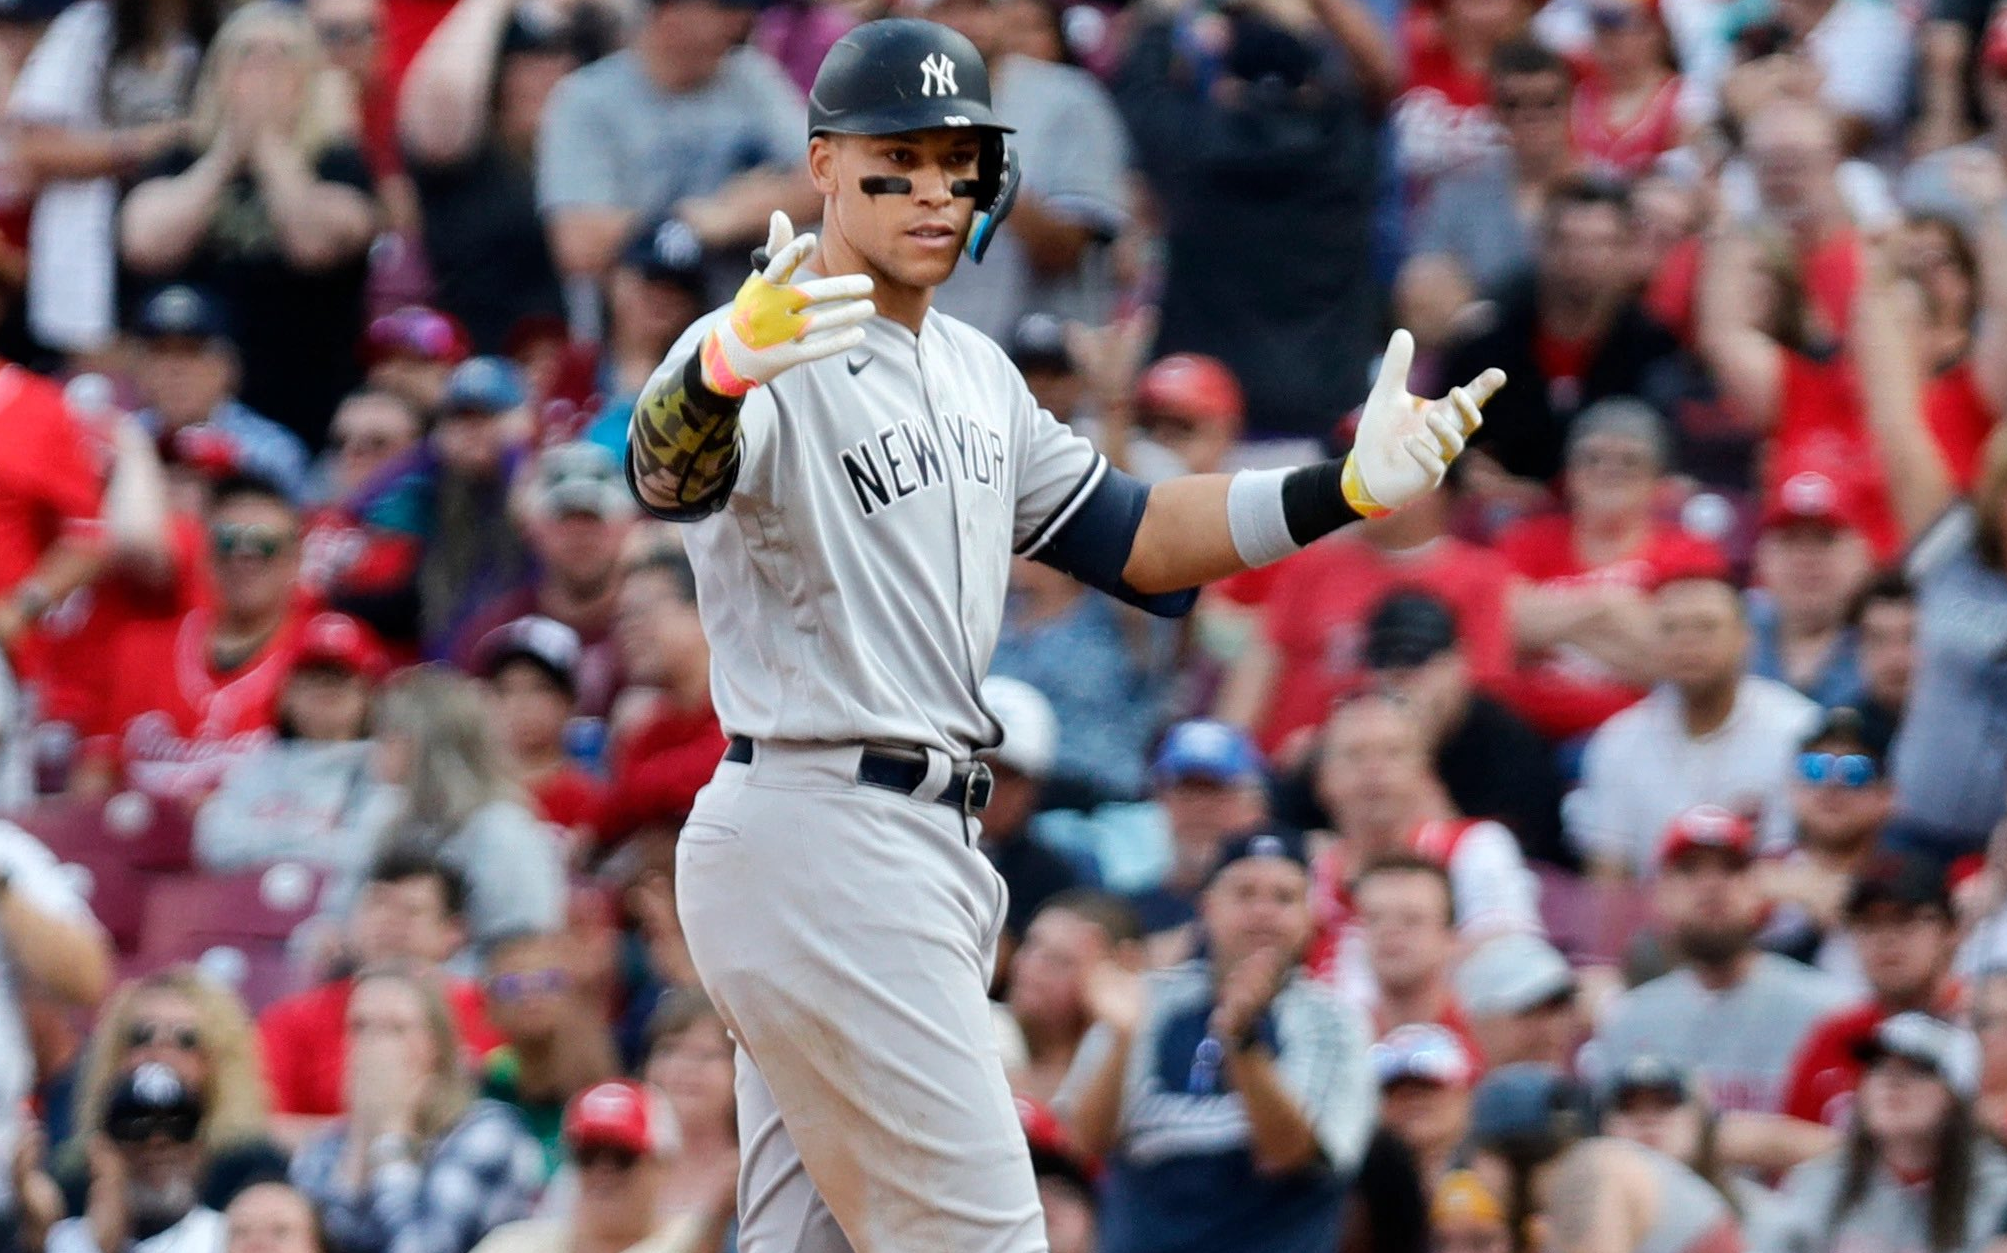 Is Yankees' Aaron Judge the largest baseball player in MLB history?